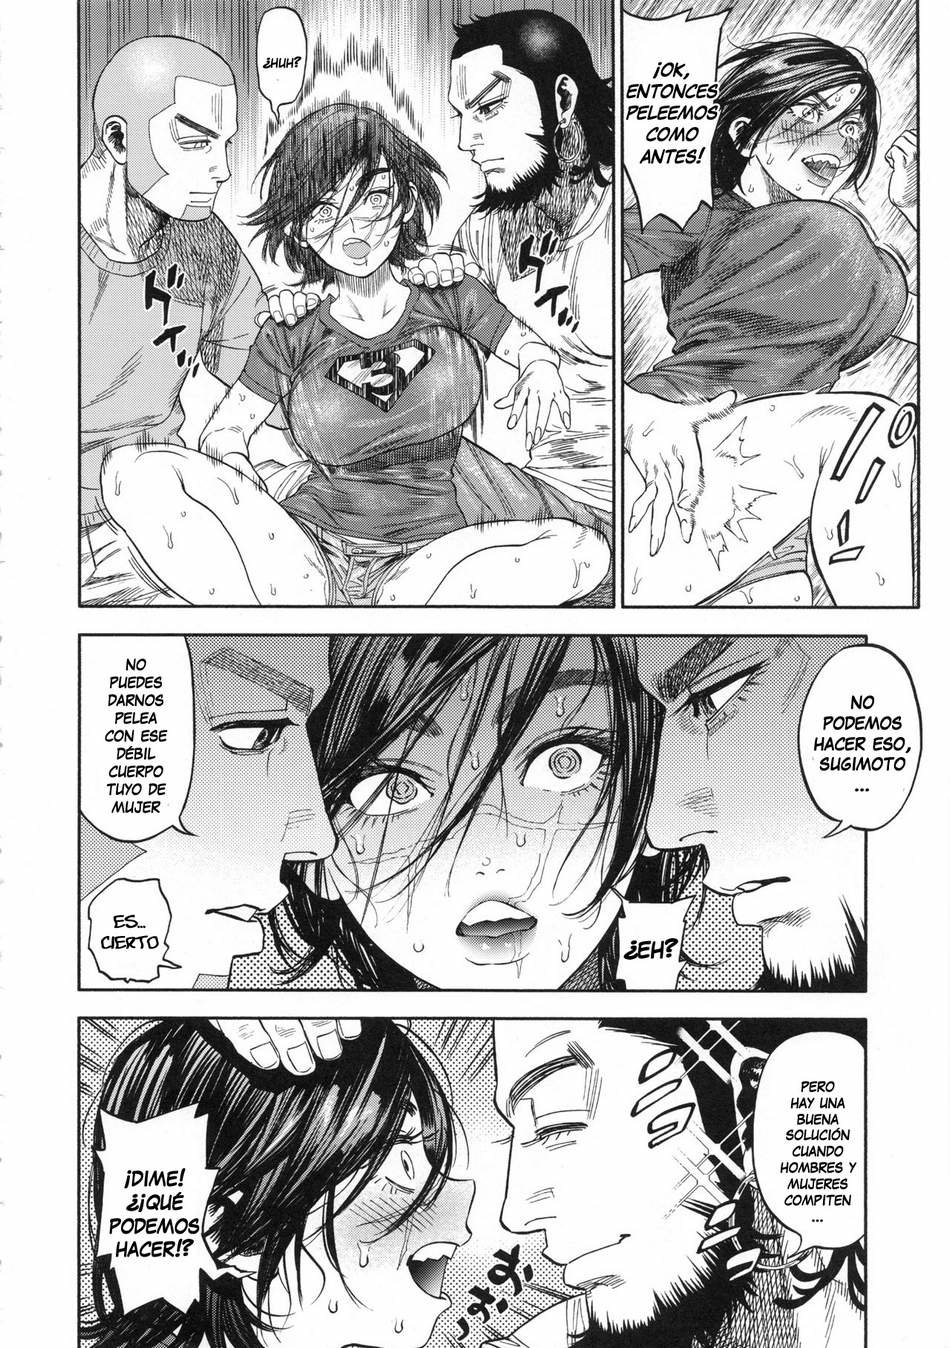 Lets Have Some Sea Otter Meat With Sugimoto-san (Golden Kamuy) - Nishida - 8